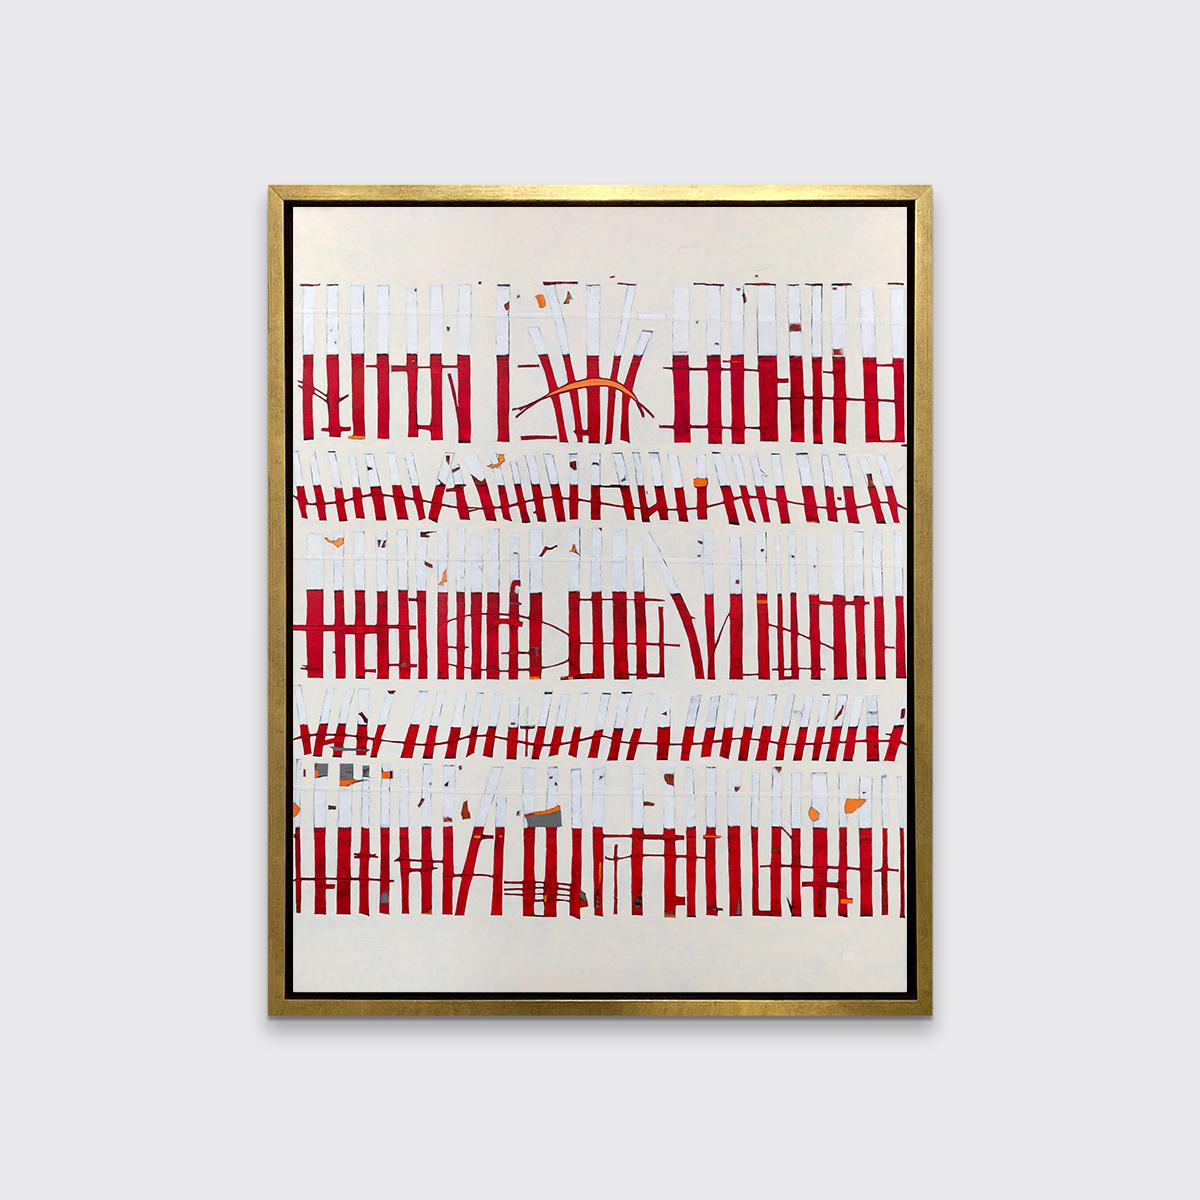 This limited edition abstract giclee print by Sofie Swann is an edition of 95. It features thin, imperfect vertical rectangular shapes which are half white and half deep red, and are stacked horizontally next to one another - some slanted and some